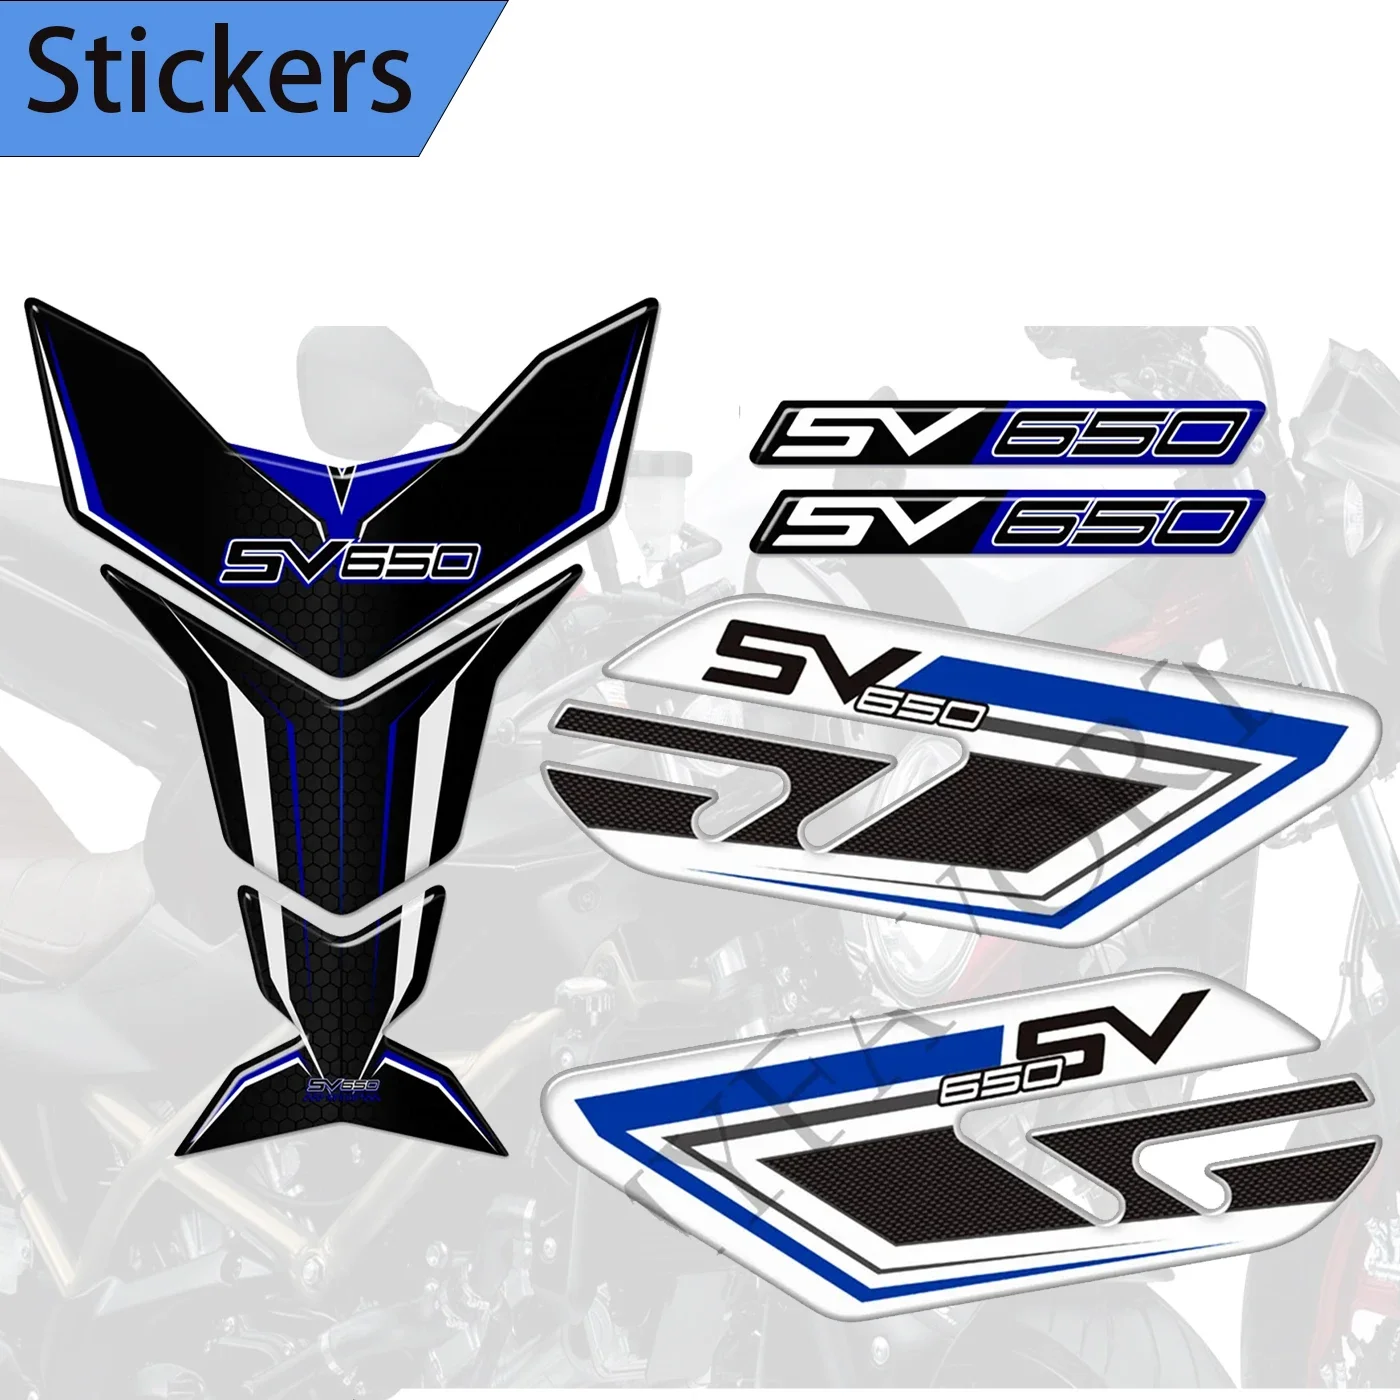 For Suzuki SV650A SV650X SV650 S X Decals Tank Pad Grips Protector Gas Fuel Oil Knee 2016 2017 -2022 3d resin motorcycle tank pad protector sticker case for suzuki sv650 sv 650 sv650a sv650x abs